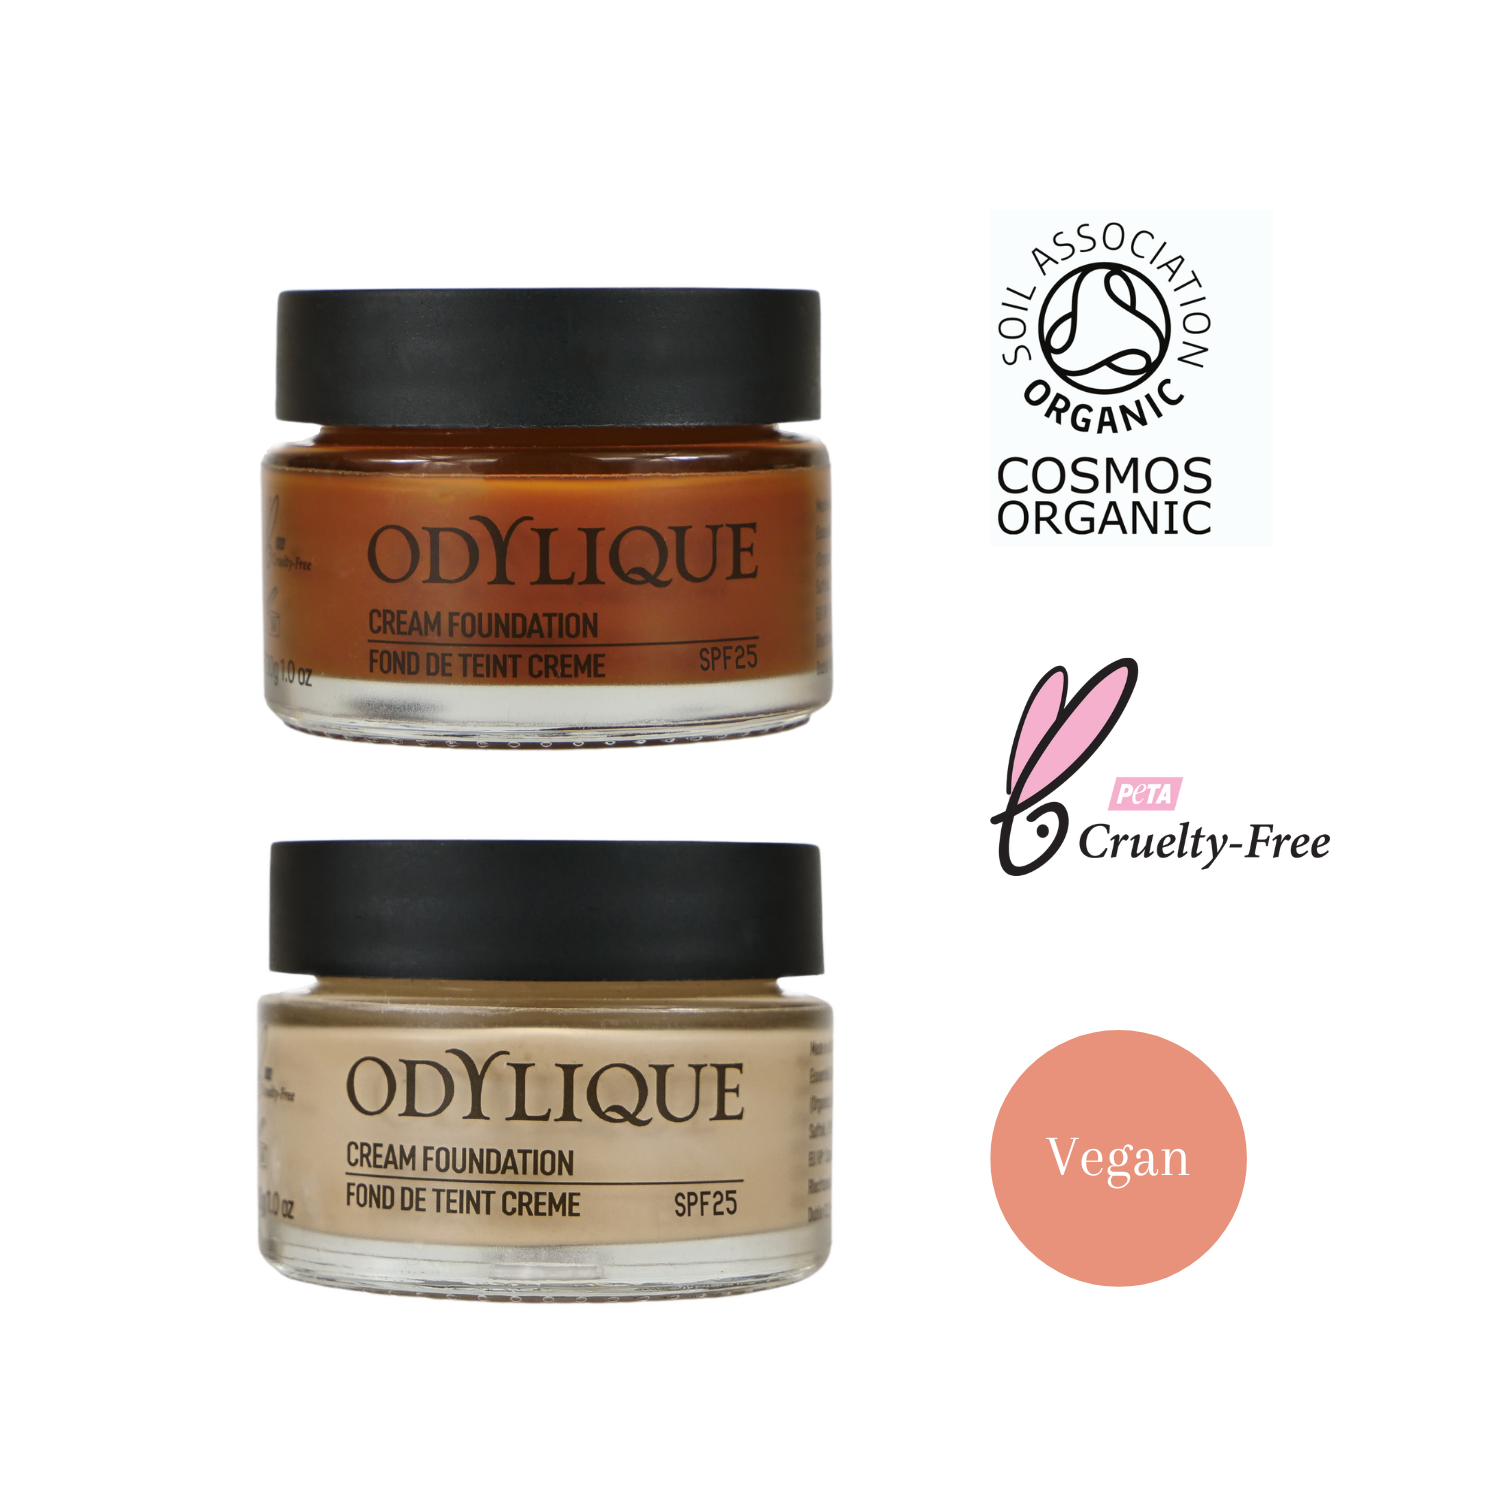 odylique cream foundation graphic showing one darker shade and one lighter shade of foundation in clear glass jars with black plastic lids. To the right is the soil association cosmos organic logo, the peta cruelty free logo and a symbol to denote that the product is vegan